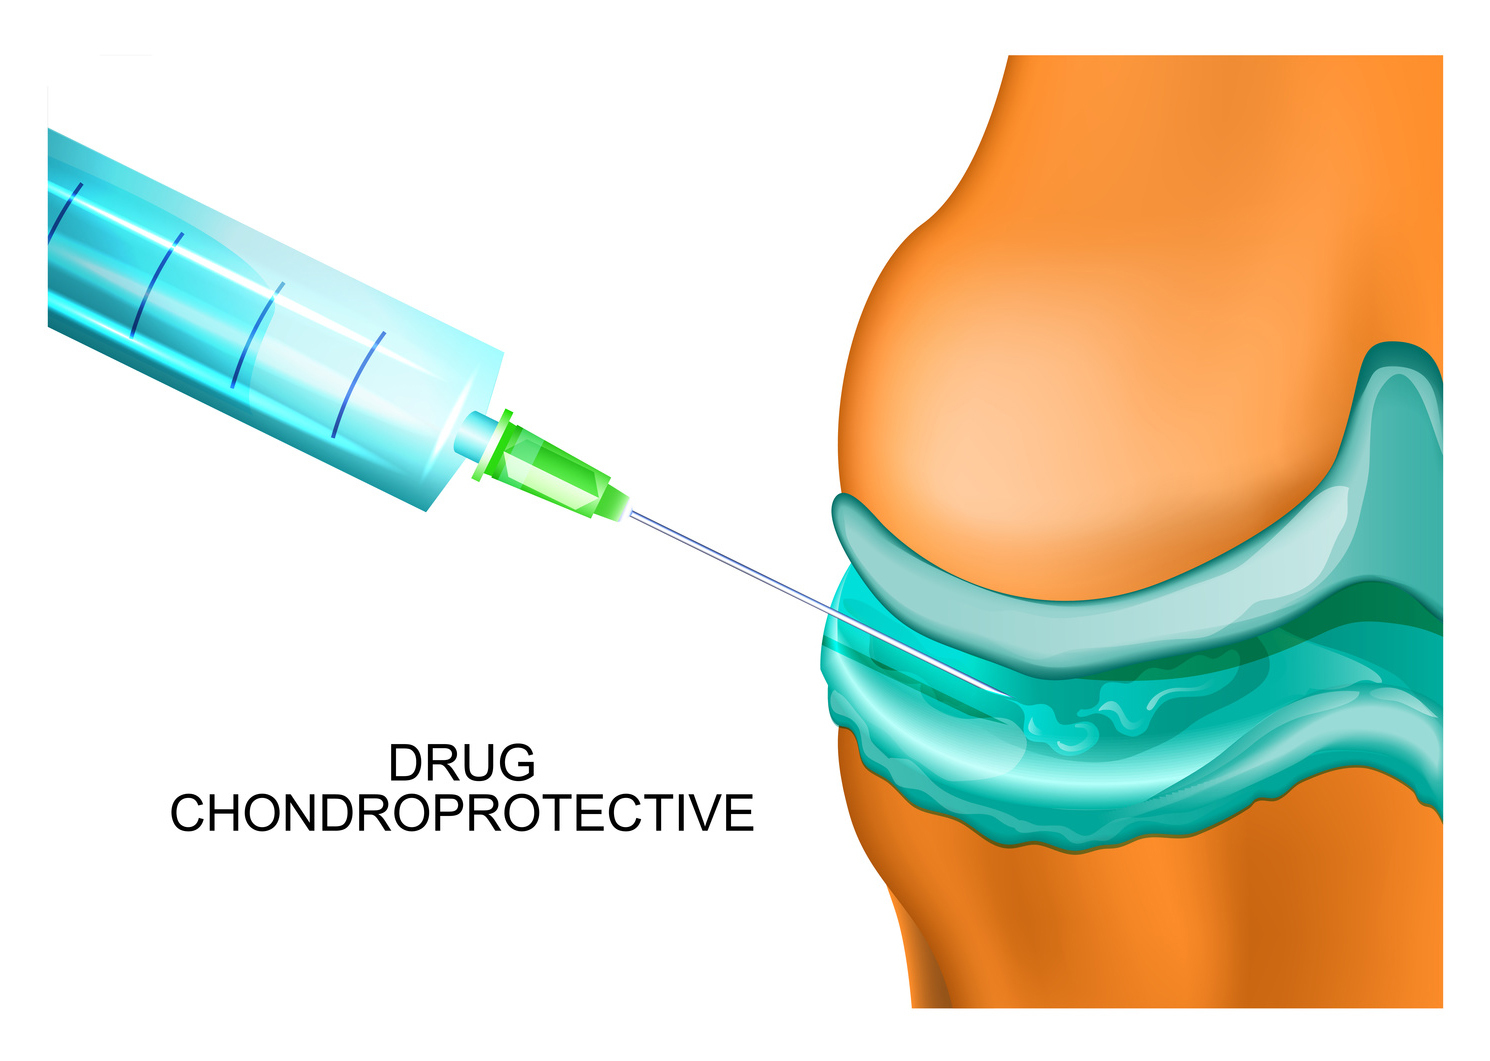 Chondroprotective Drugs